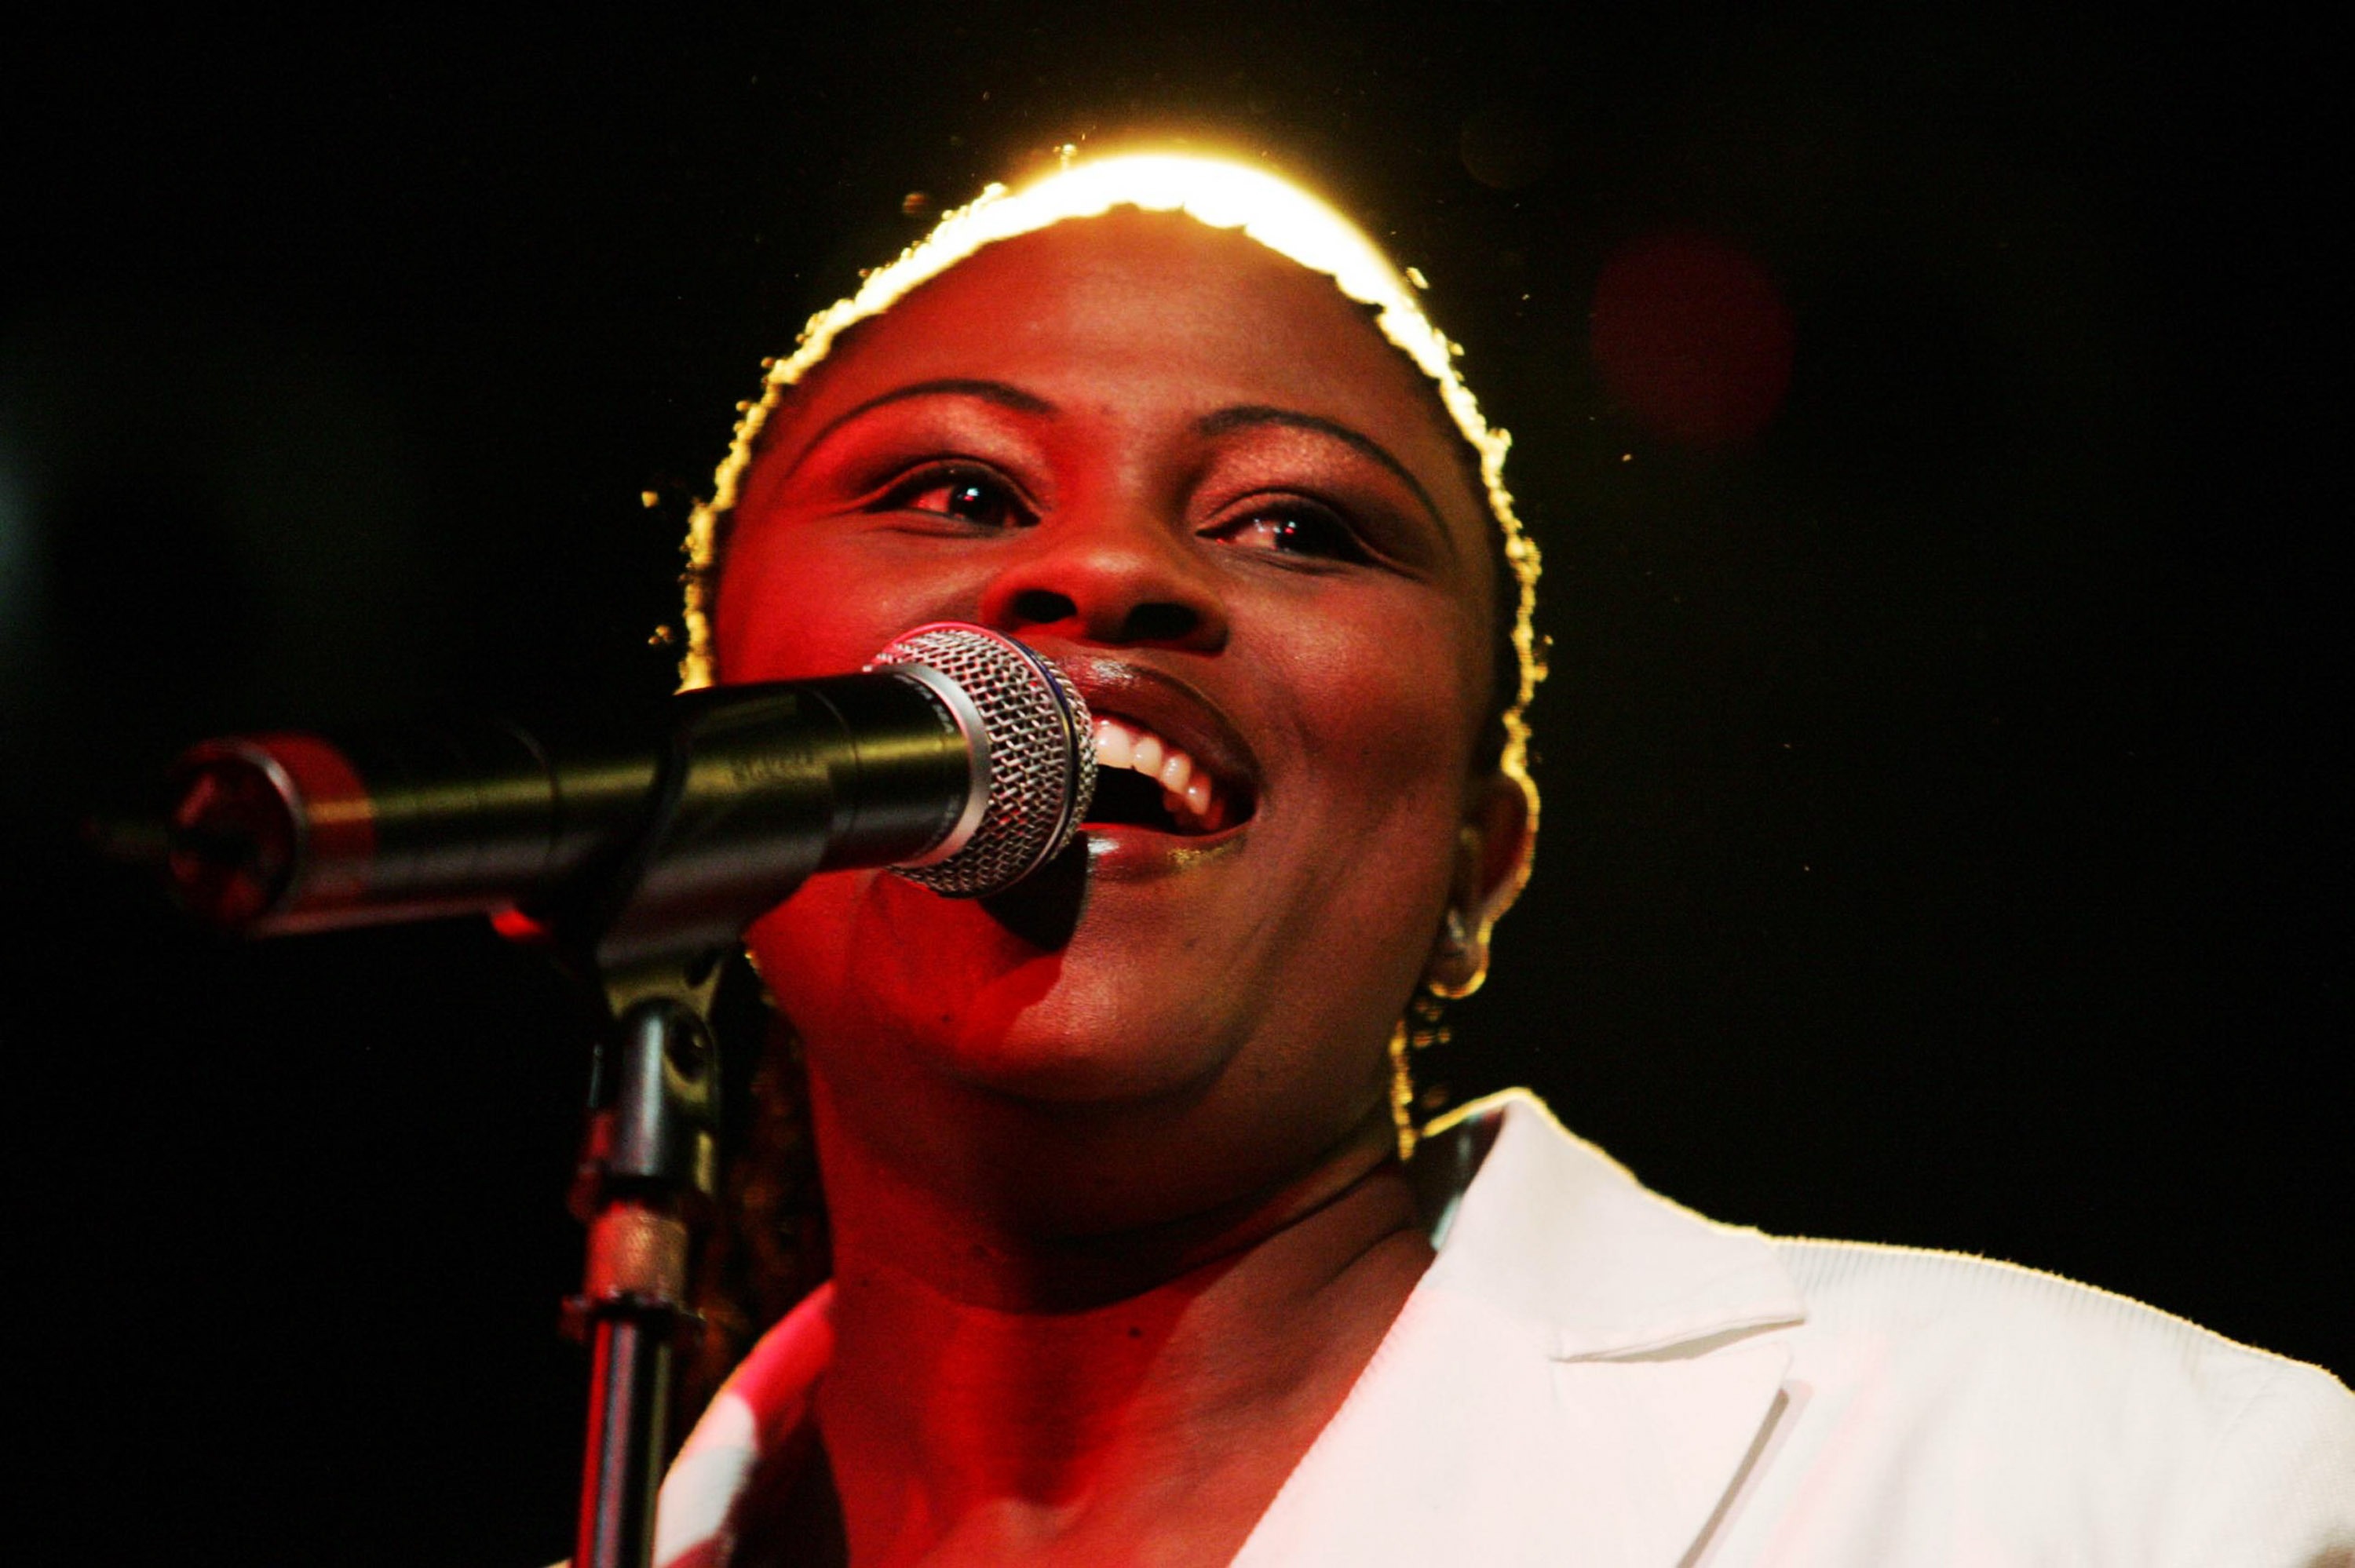 Gloria Bosman performs on stage during the Standard Bank Joy of Jazz 2007 held in Newtown on August 24, 2007 in Johannesburg, South Africa. Image: Lefty Shivambu / Gallo Images